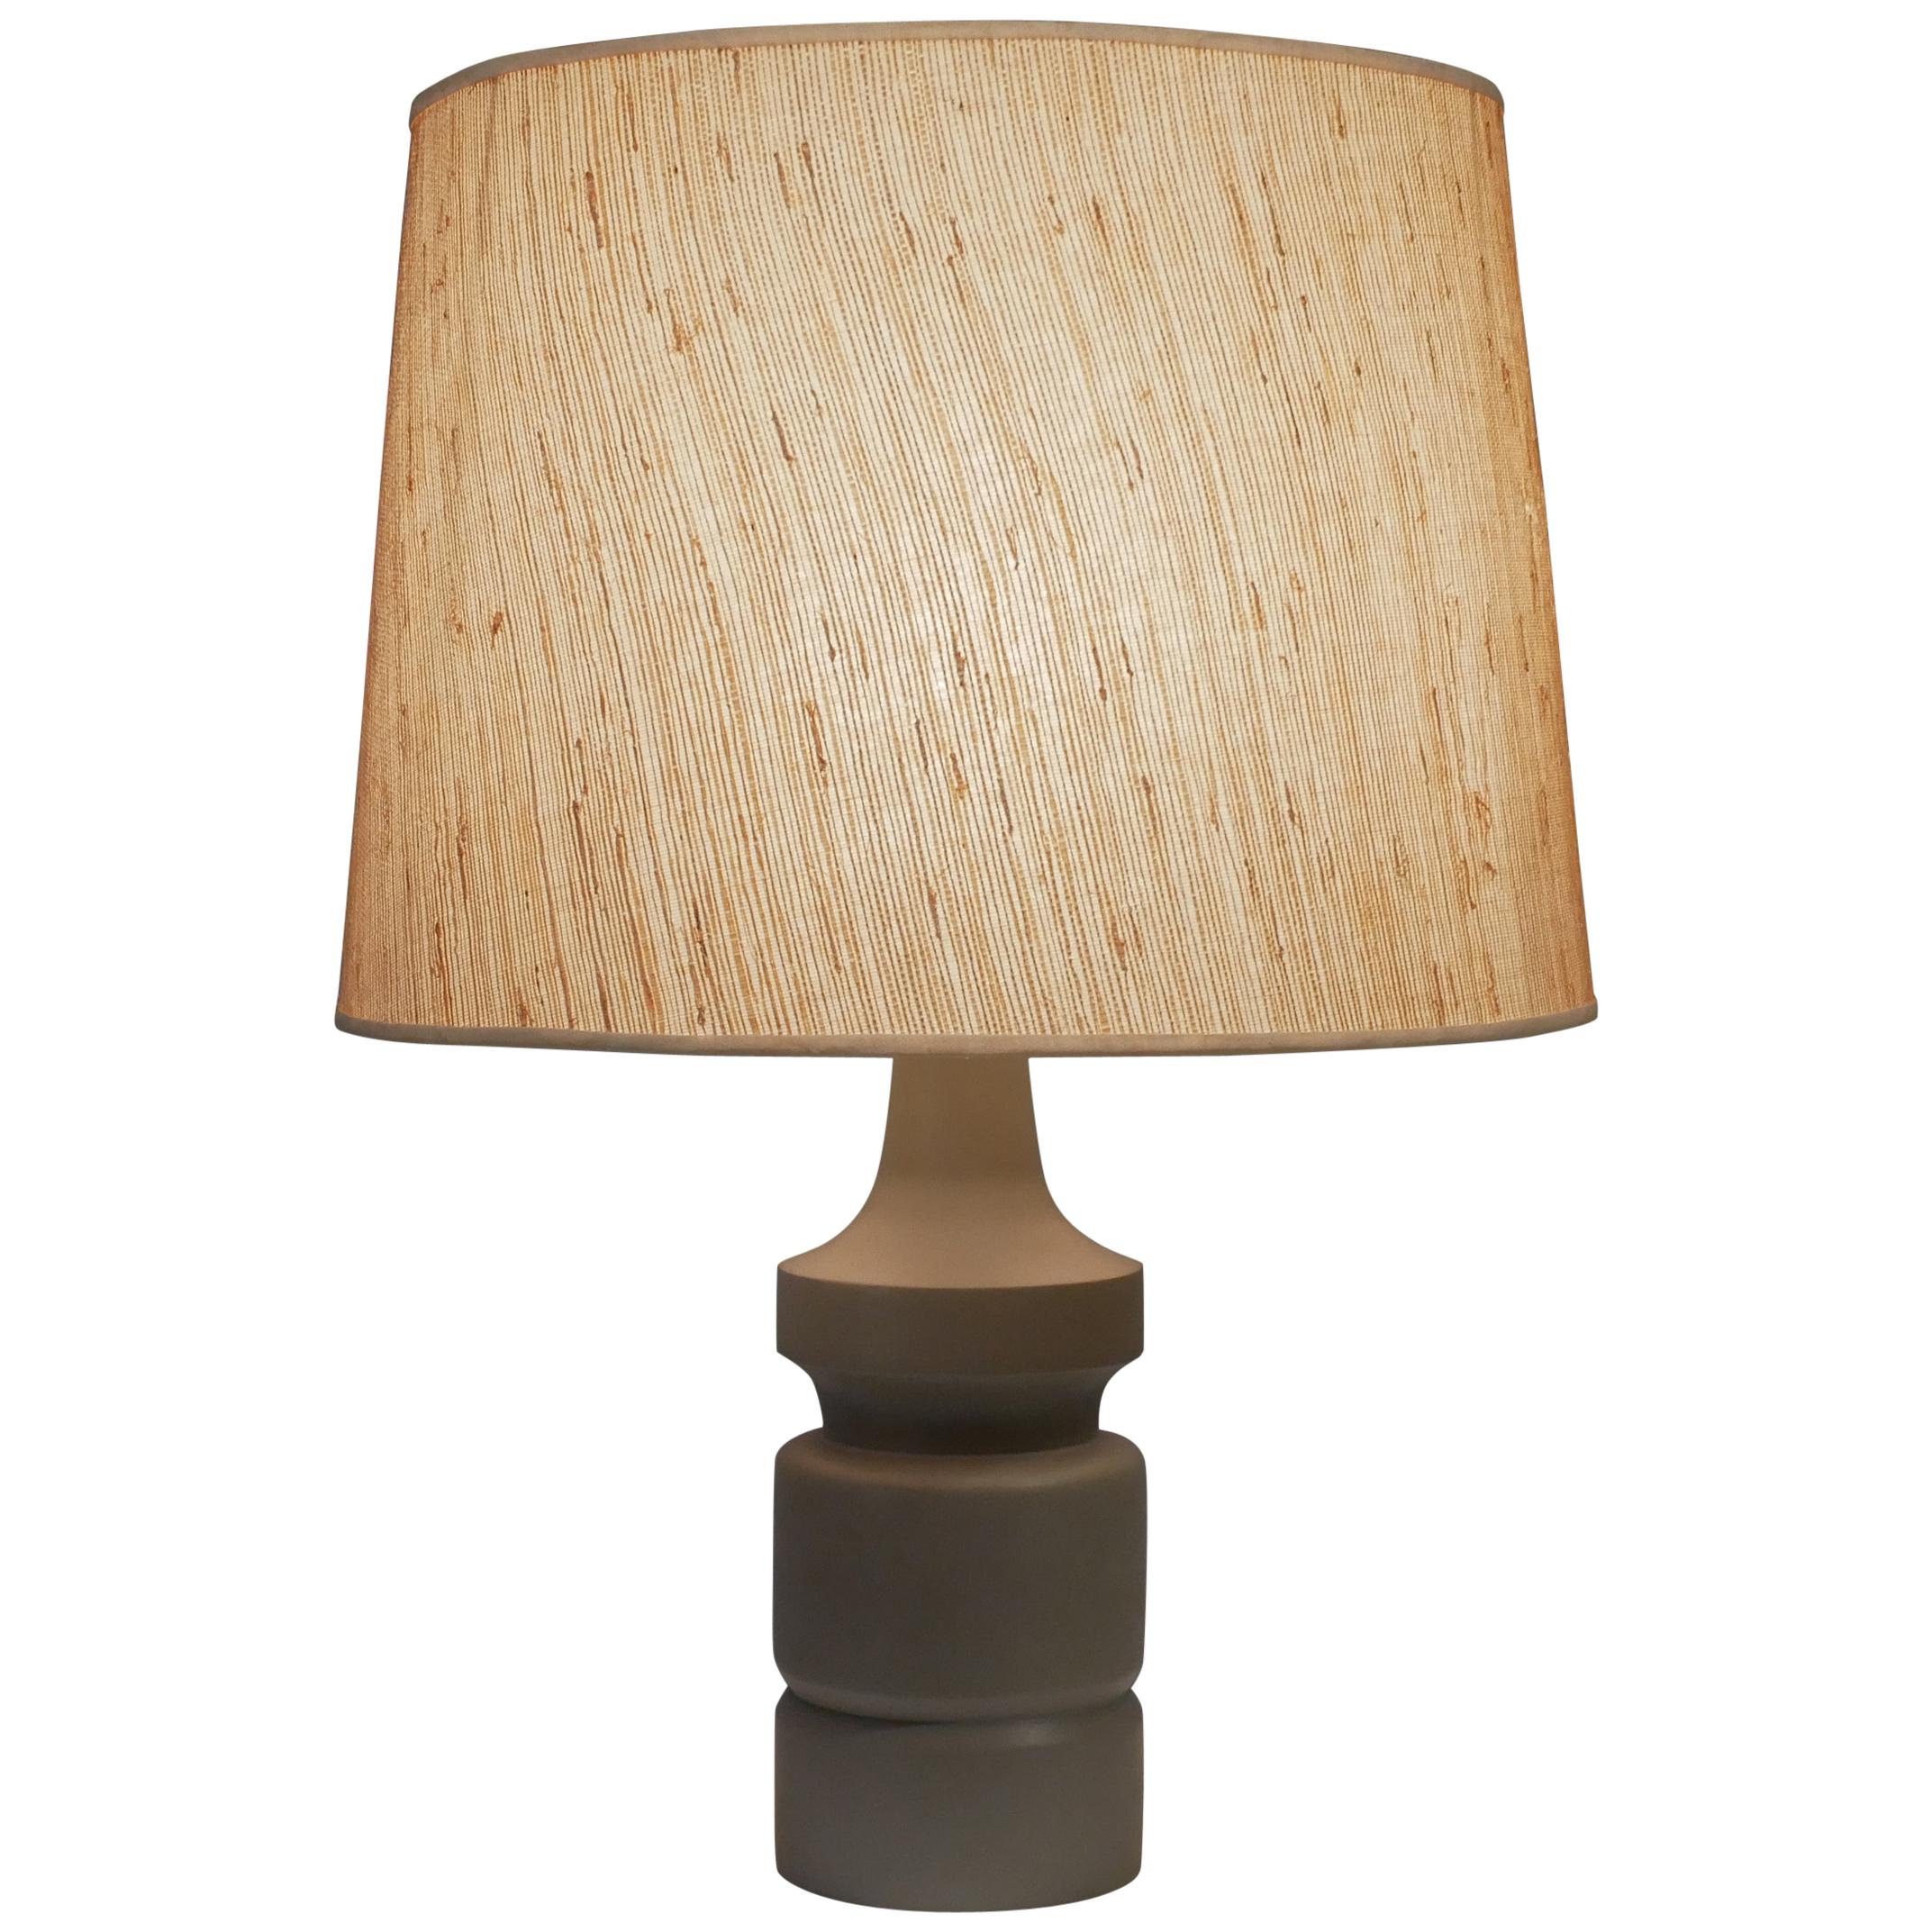 Erik Höglund Table Lamp in Solid Pine, 1960s For Sale